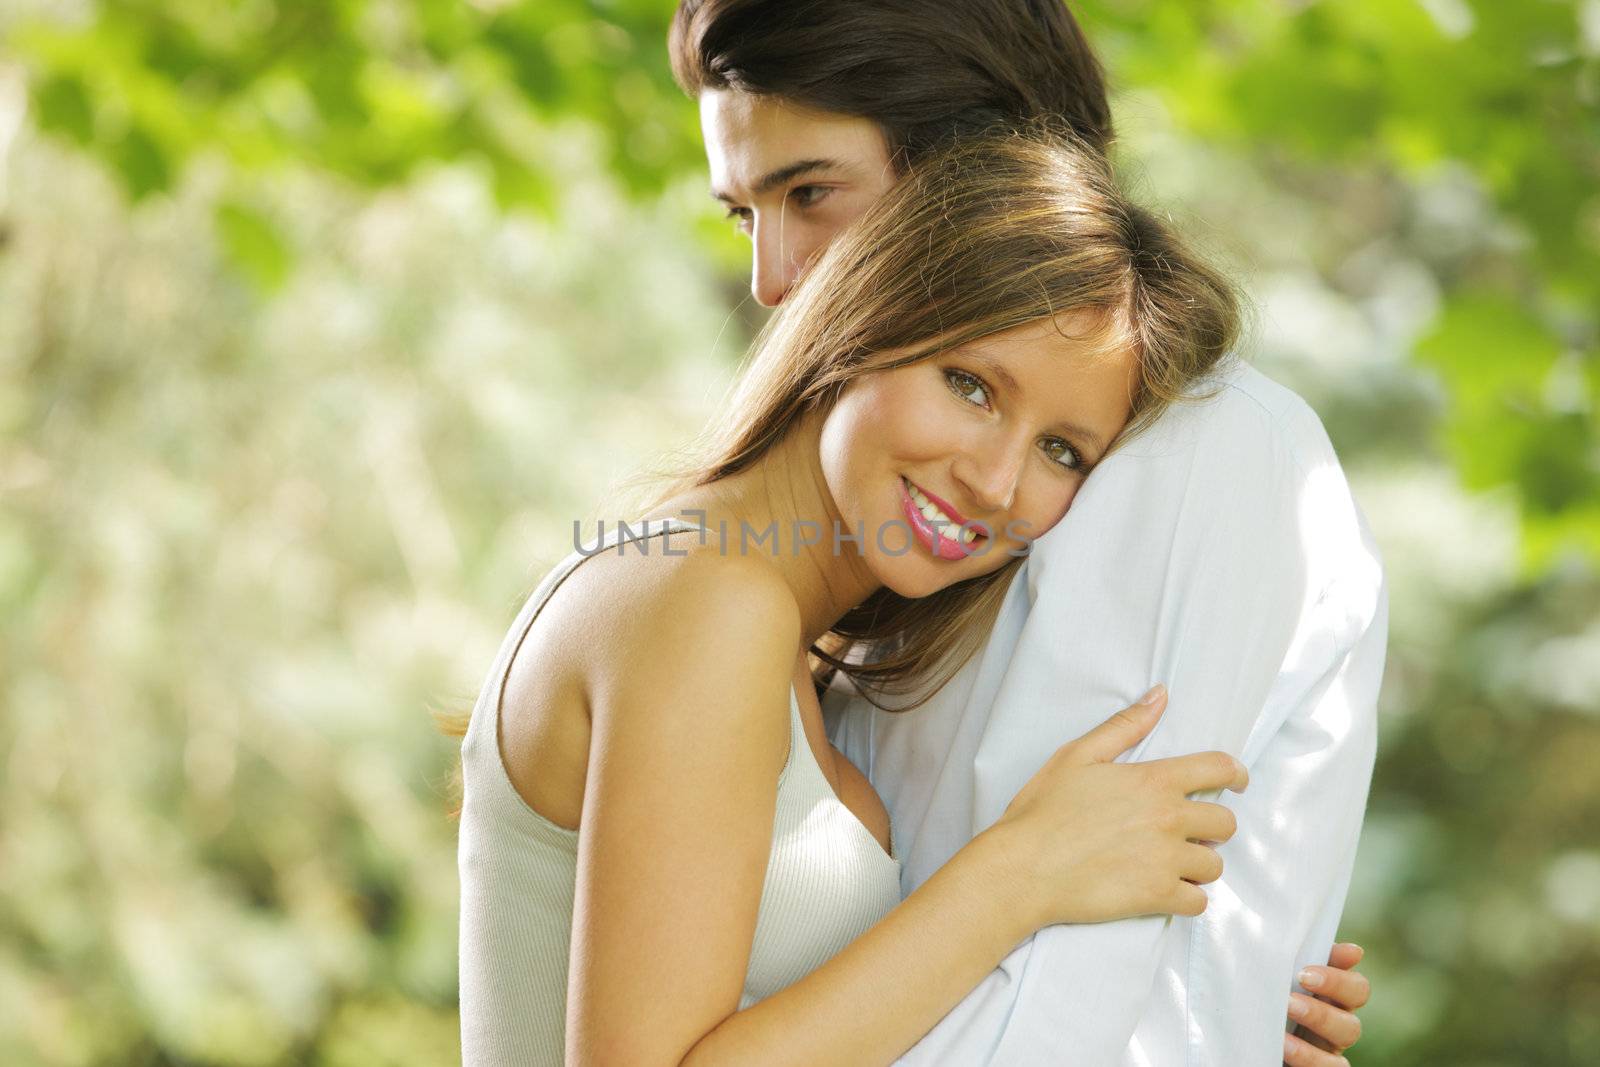 the romantic embrace of a young couple in love